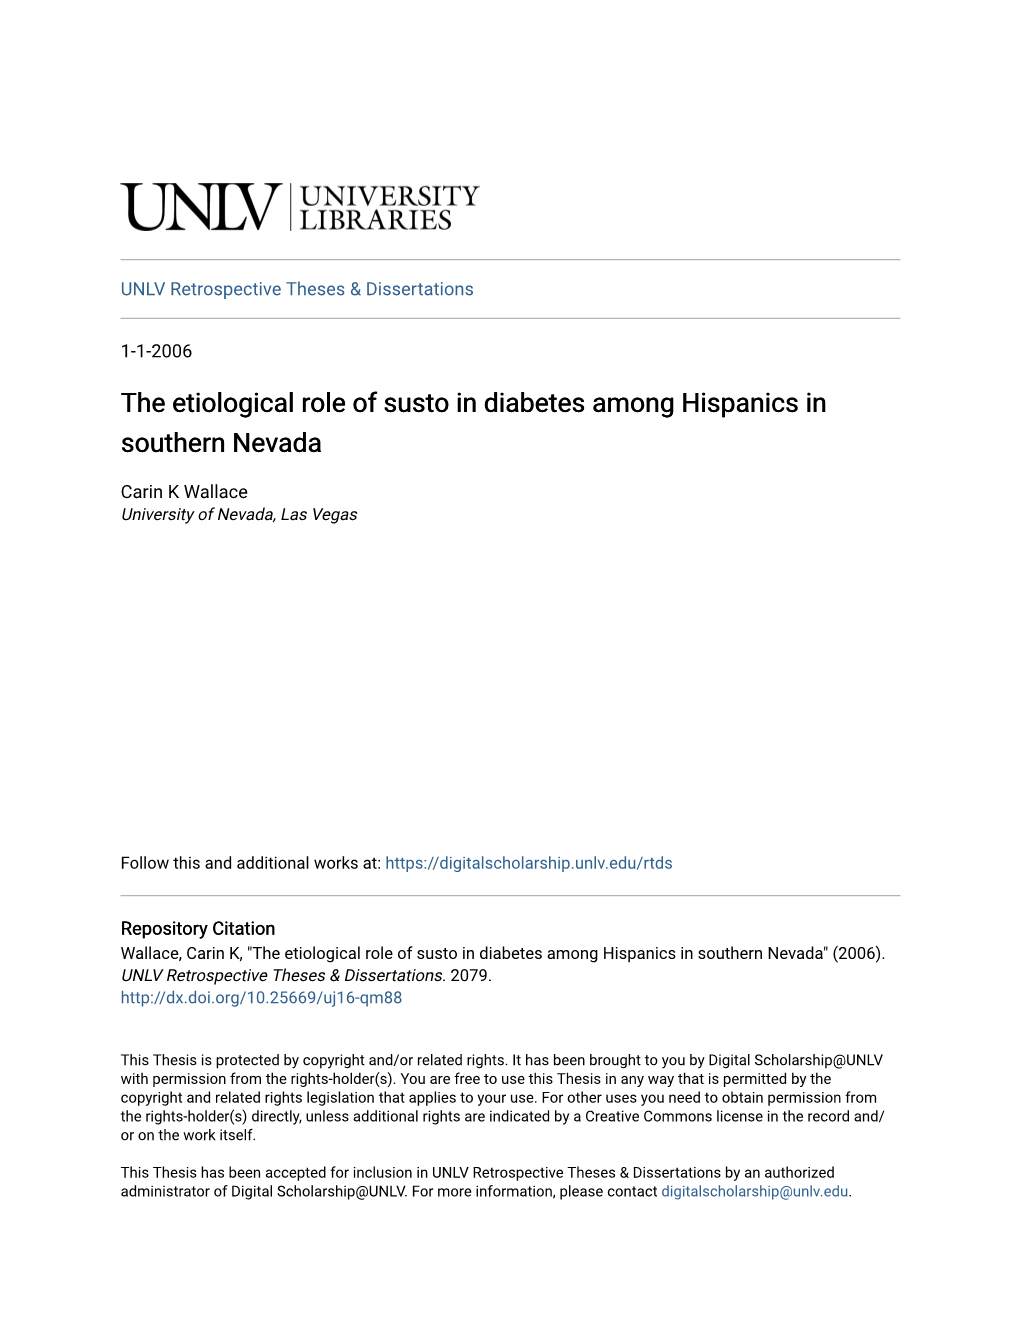 The Etiological Role of Susto in Diabetes Among Hispanics in Southern Nevada